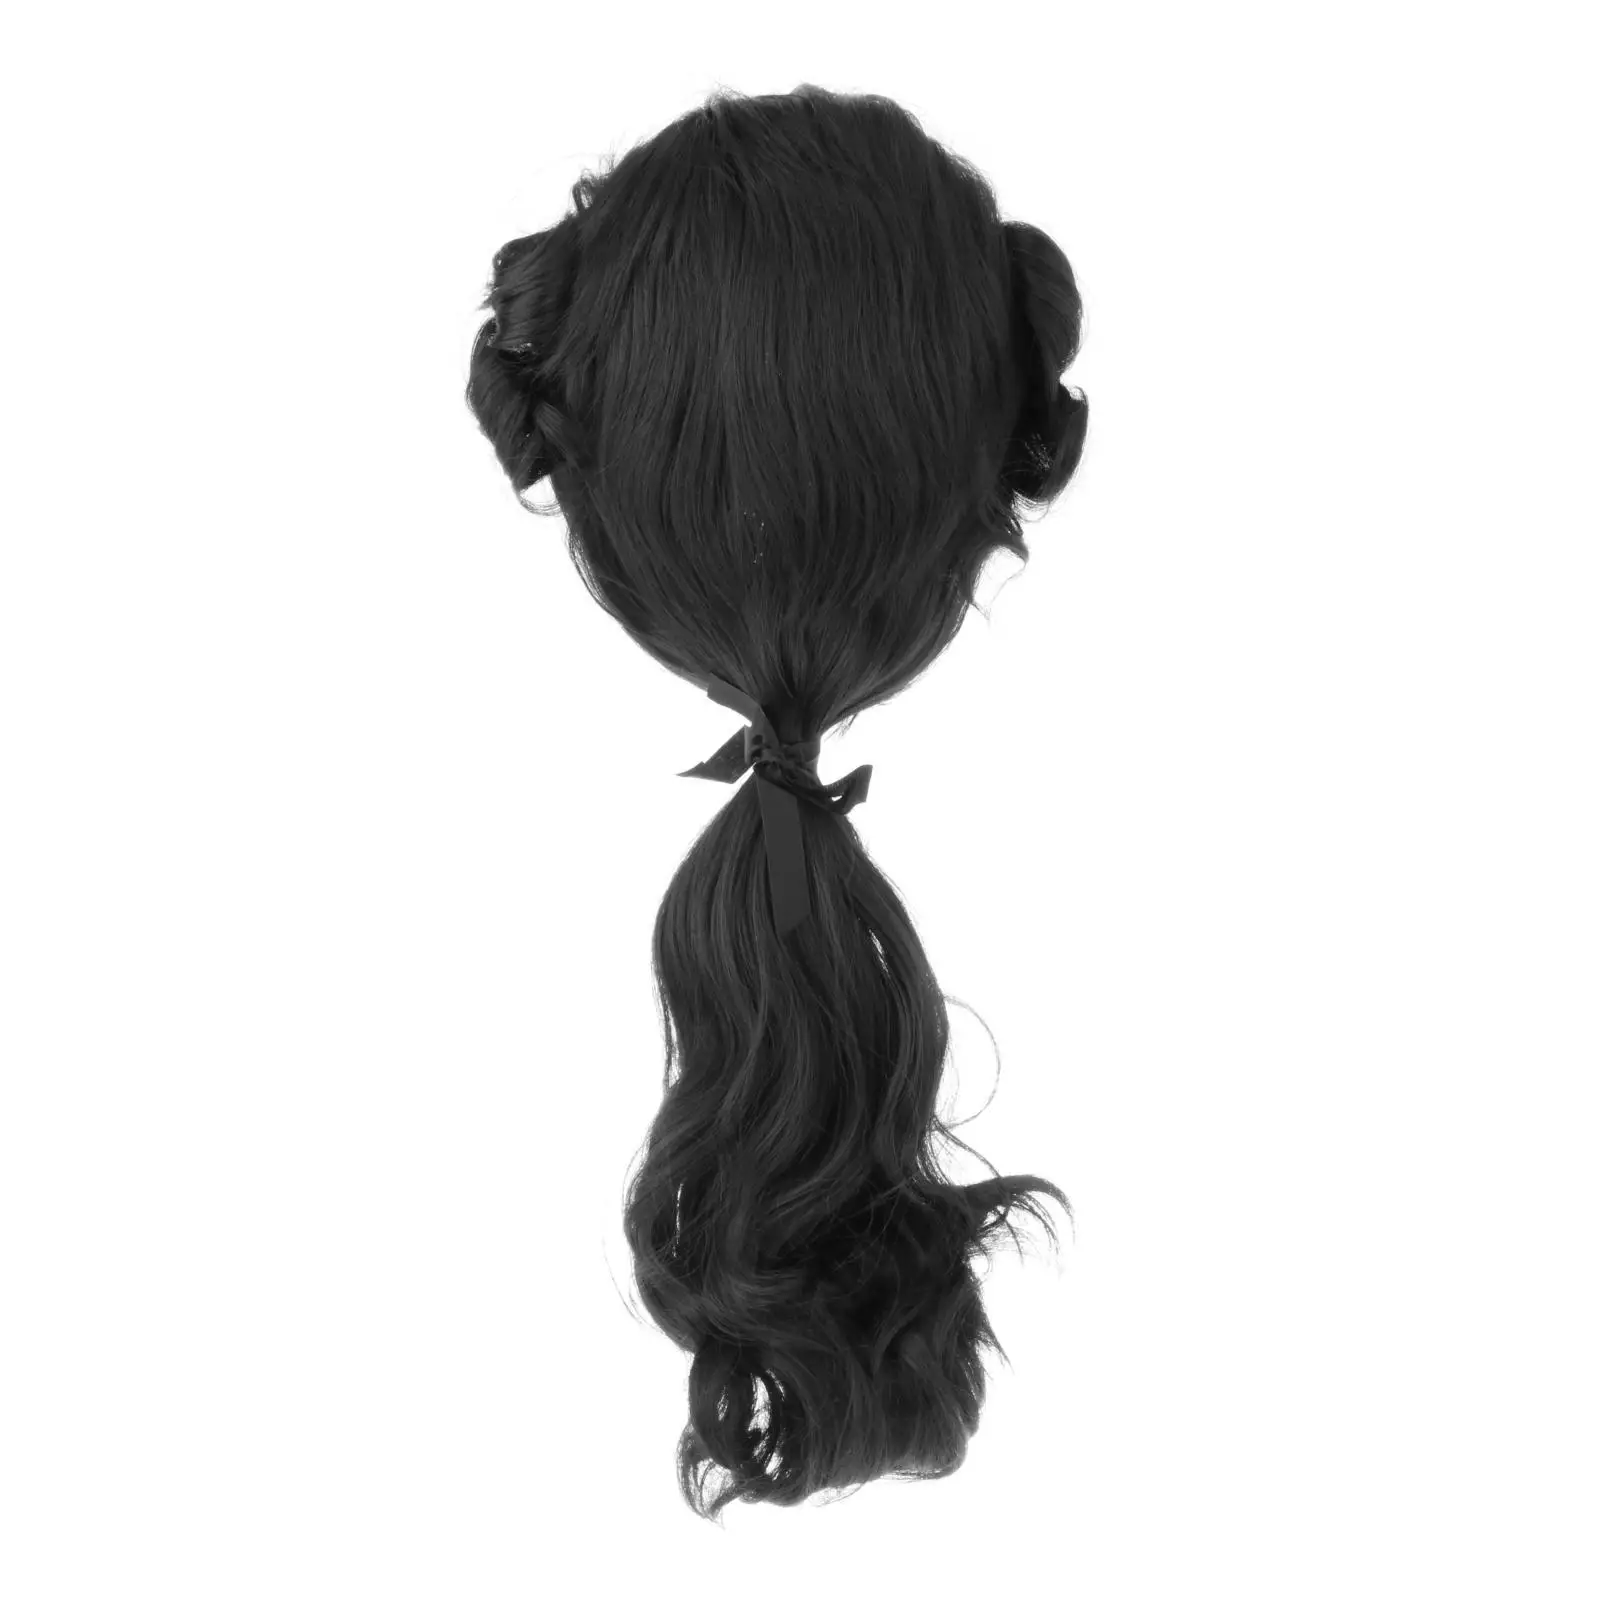 Colonial Wig Synthetic Theme Party Universal Comic Con Adjustable Halloween Wigs Cosplay Heat Resistant Long Curly